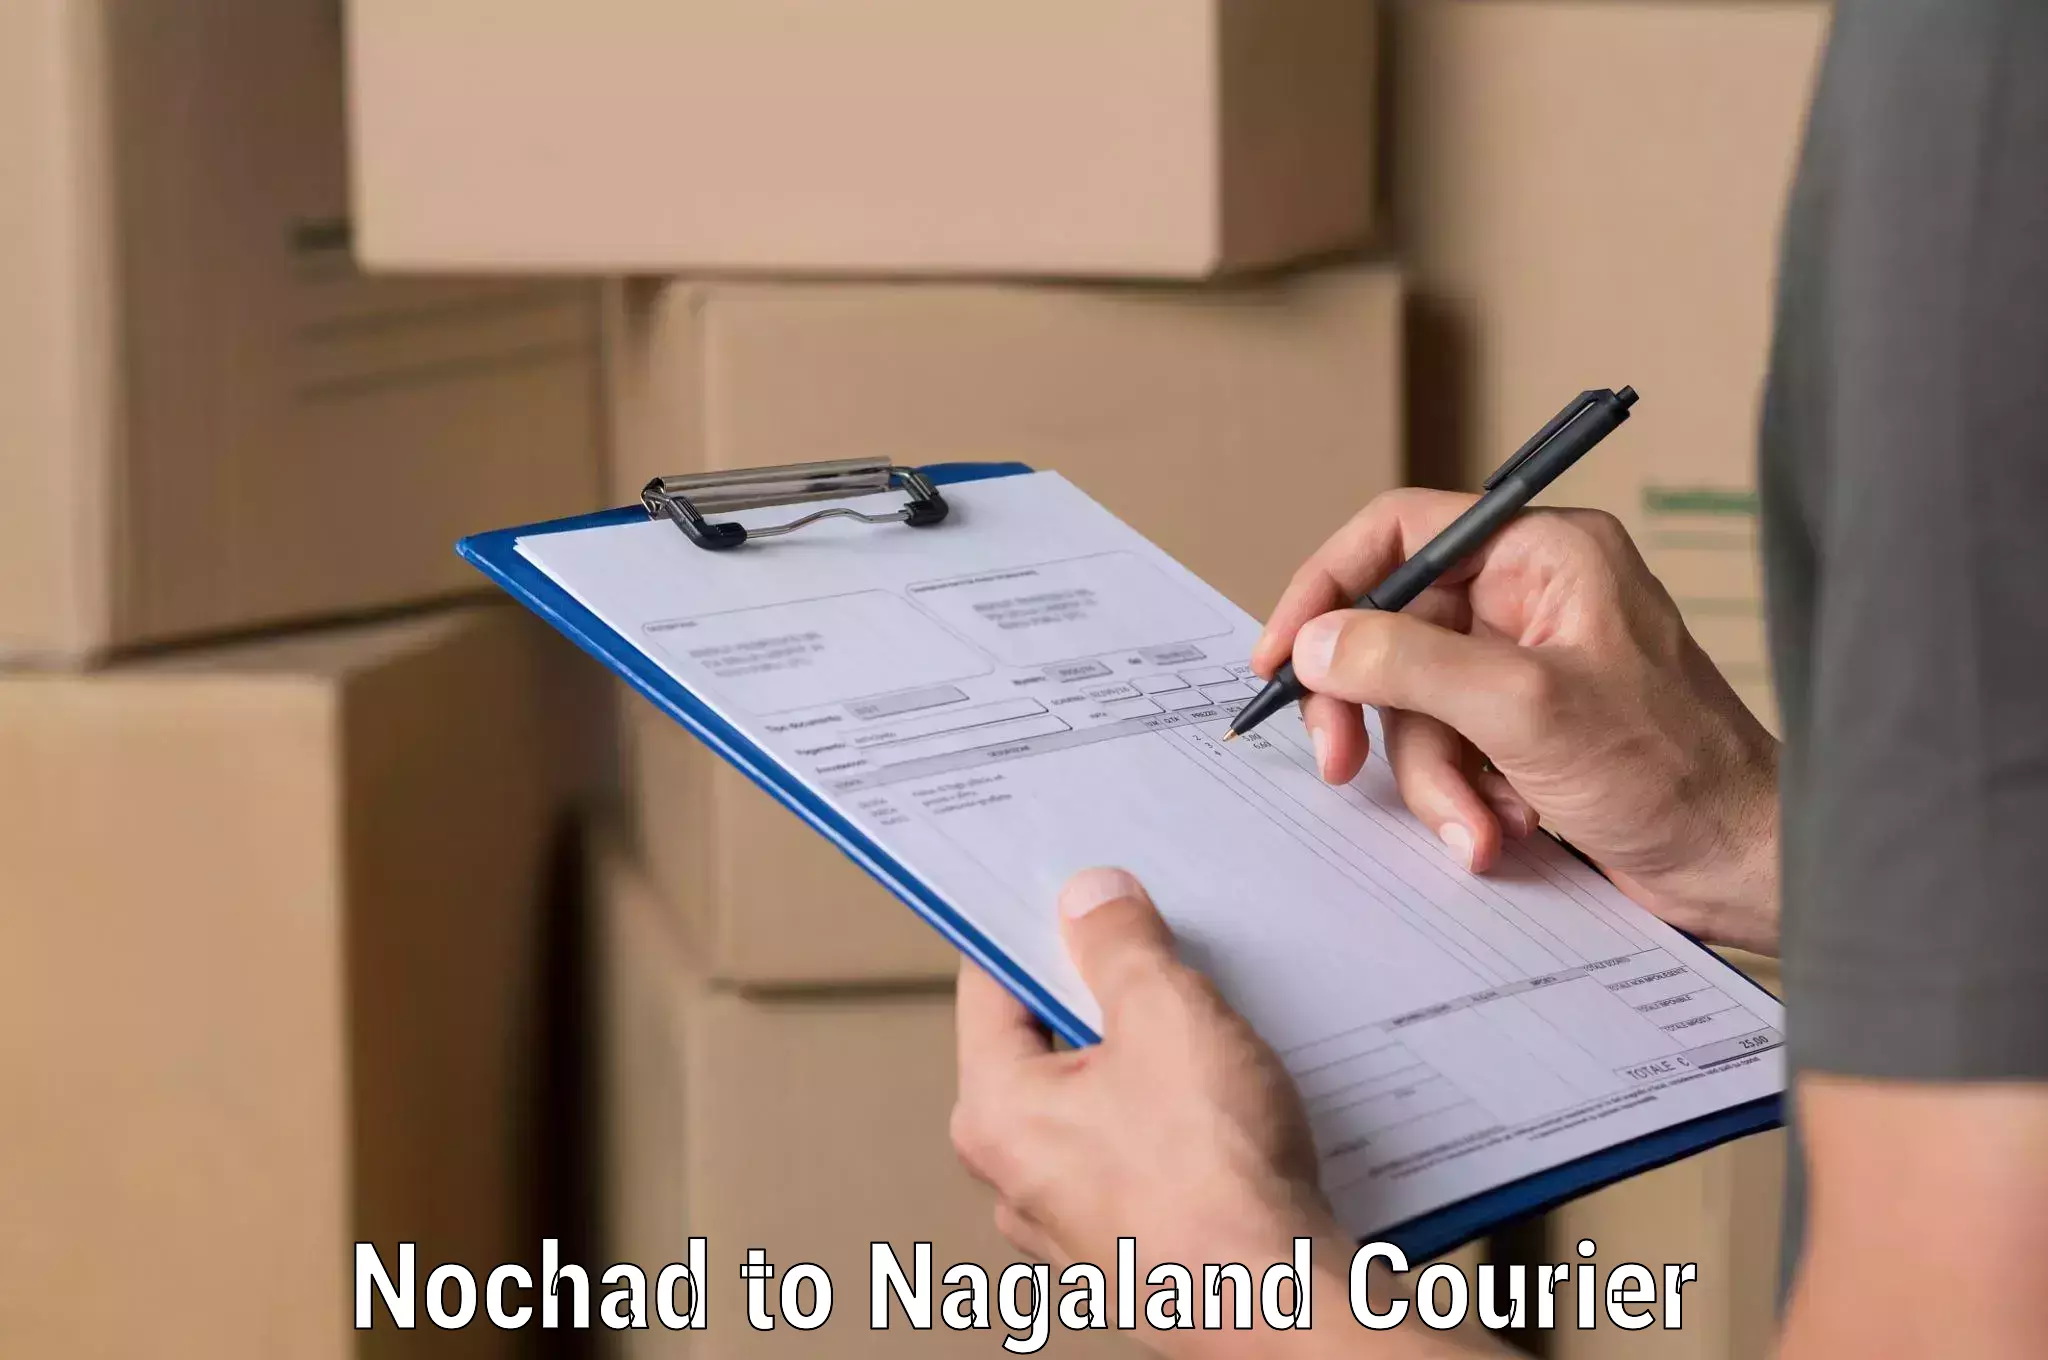 Flexible delivery schedules Nochad to NIT Nagaland